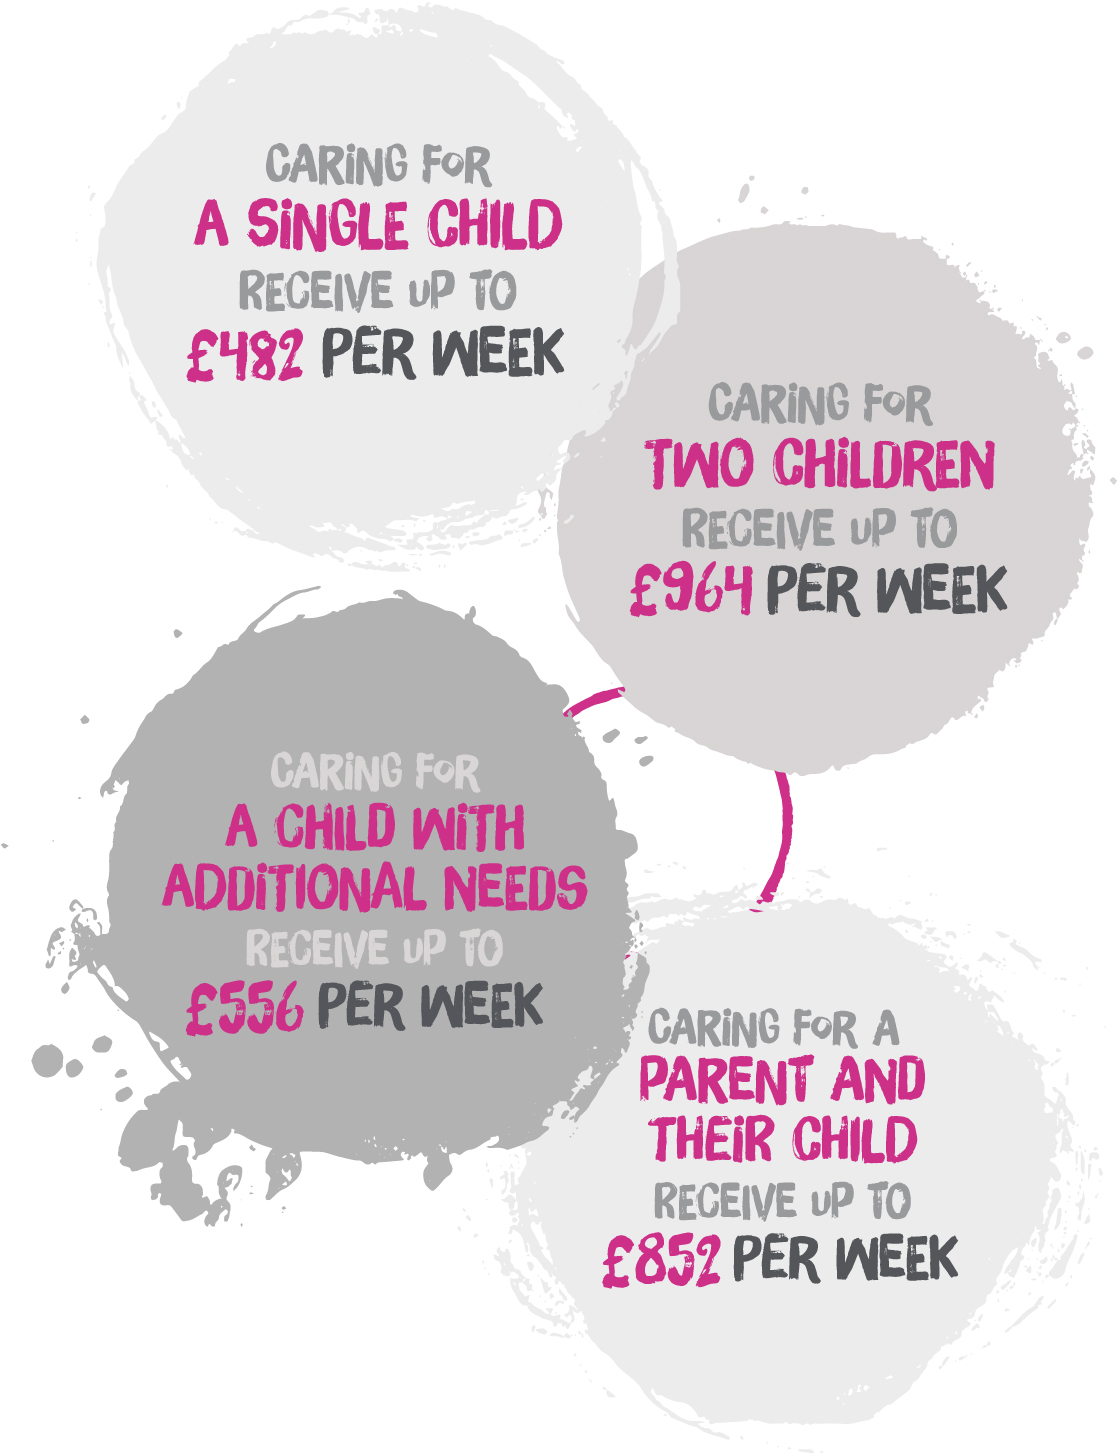 These are our fees if you're thinking of fostering in Croydon